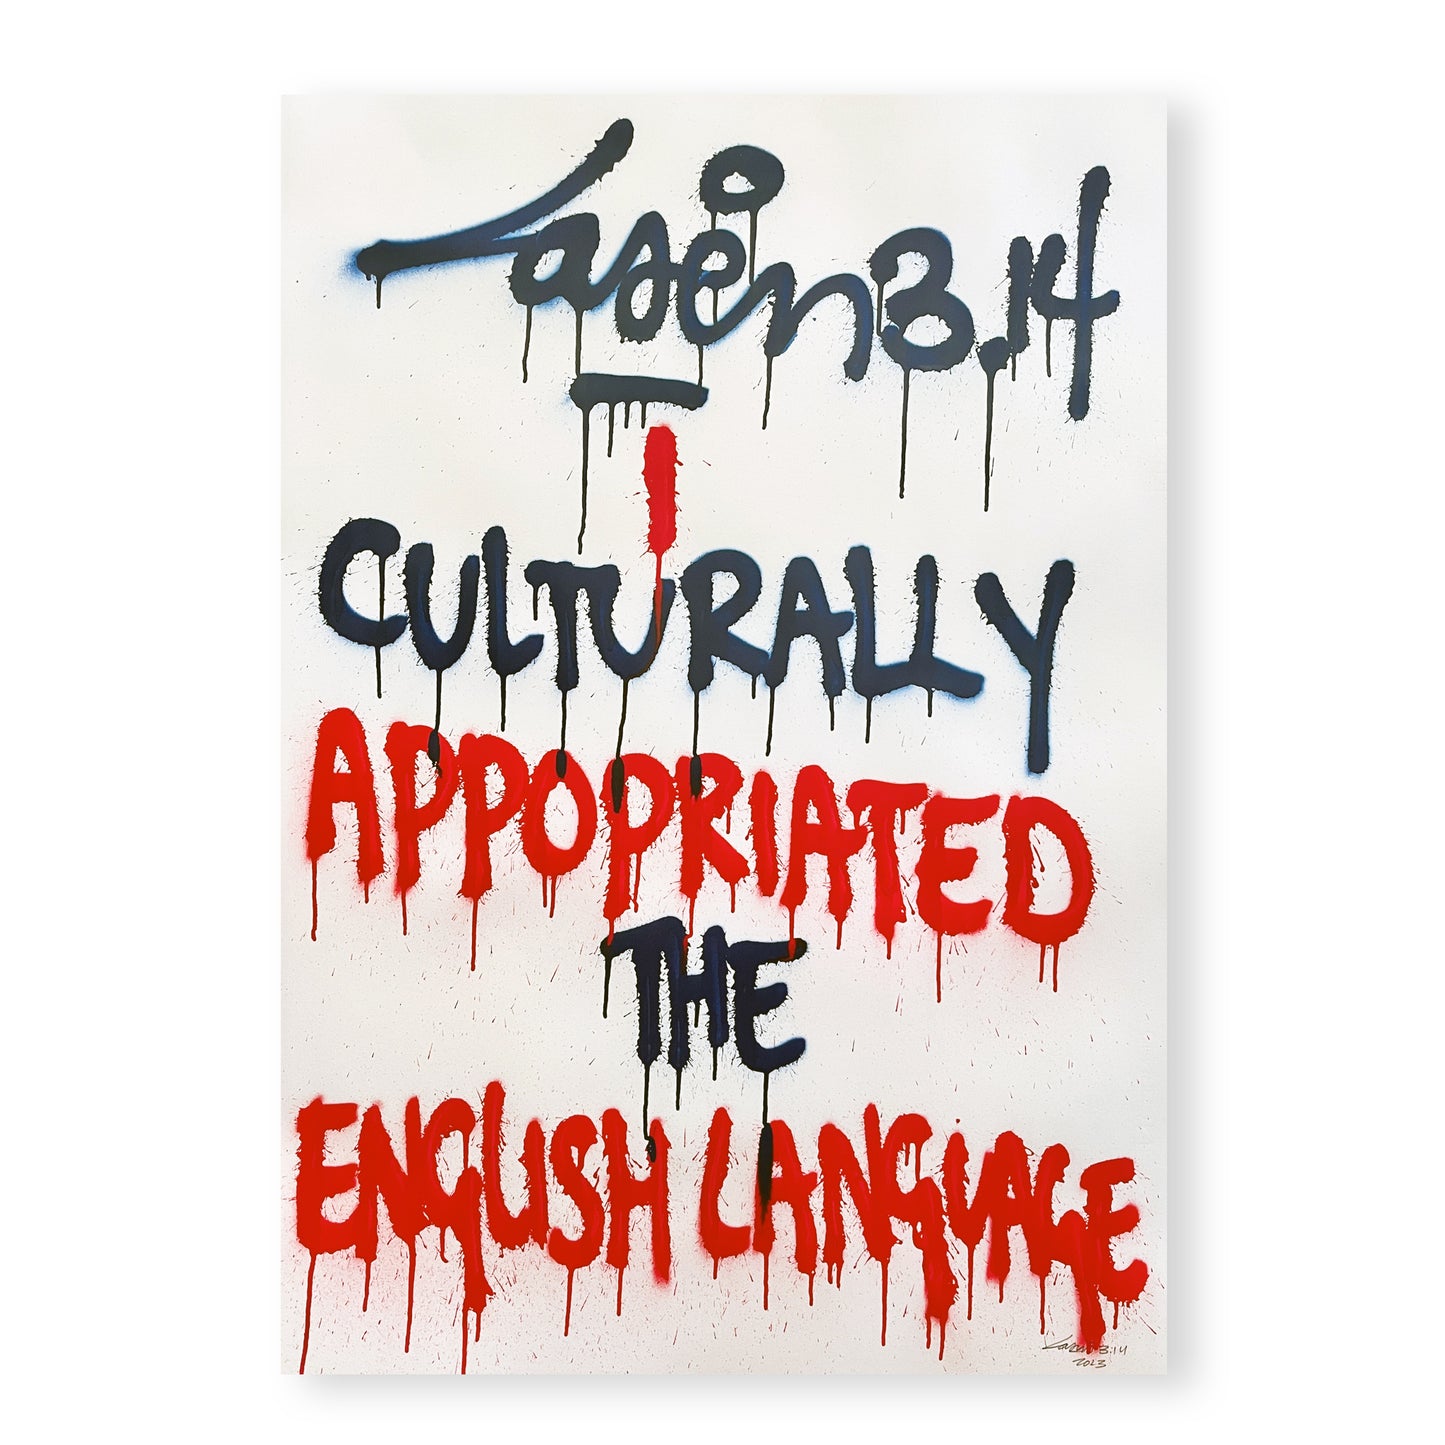 I Culturally Appropriated The English Language